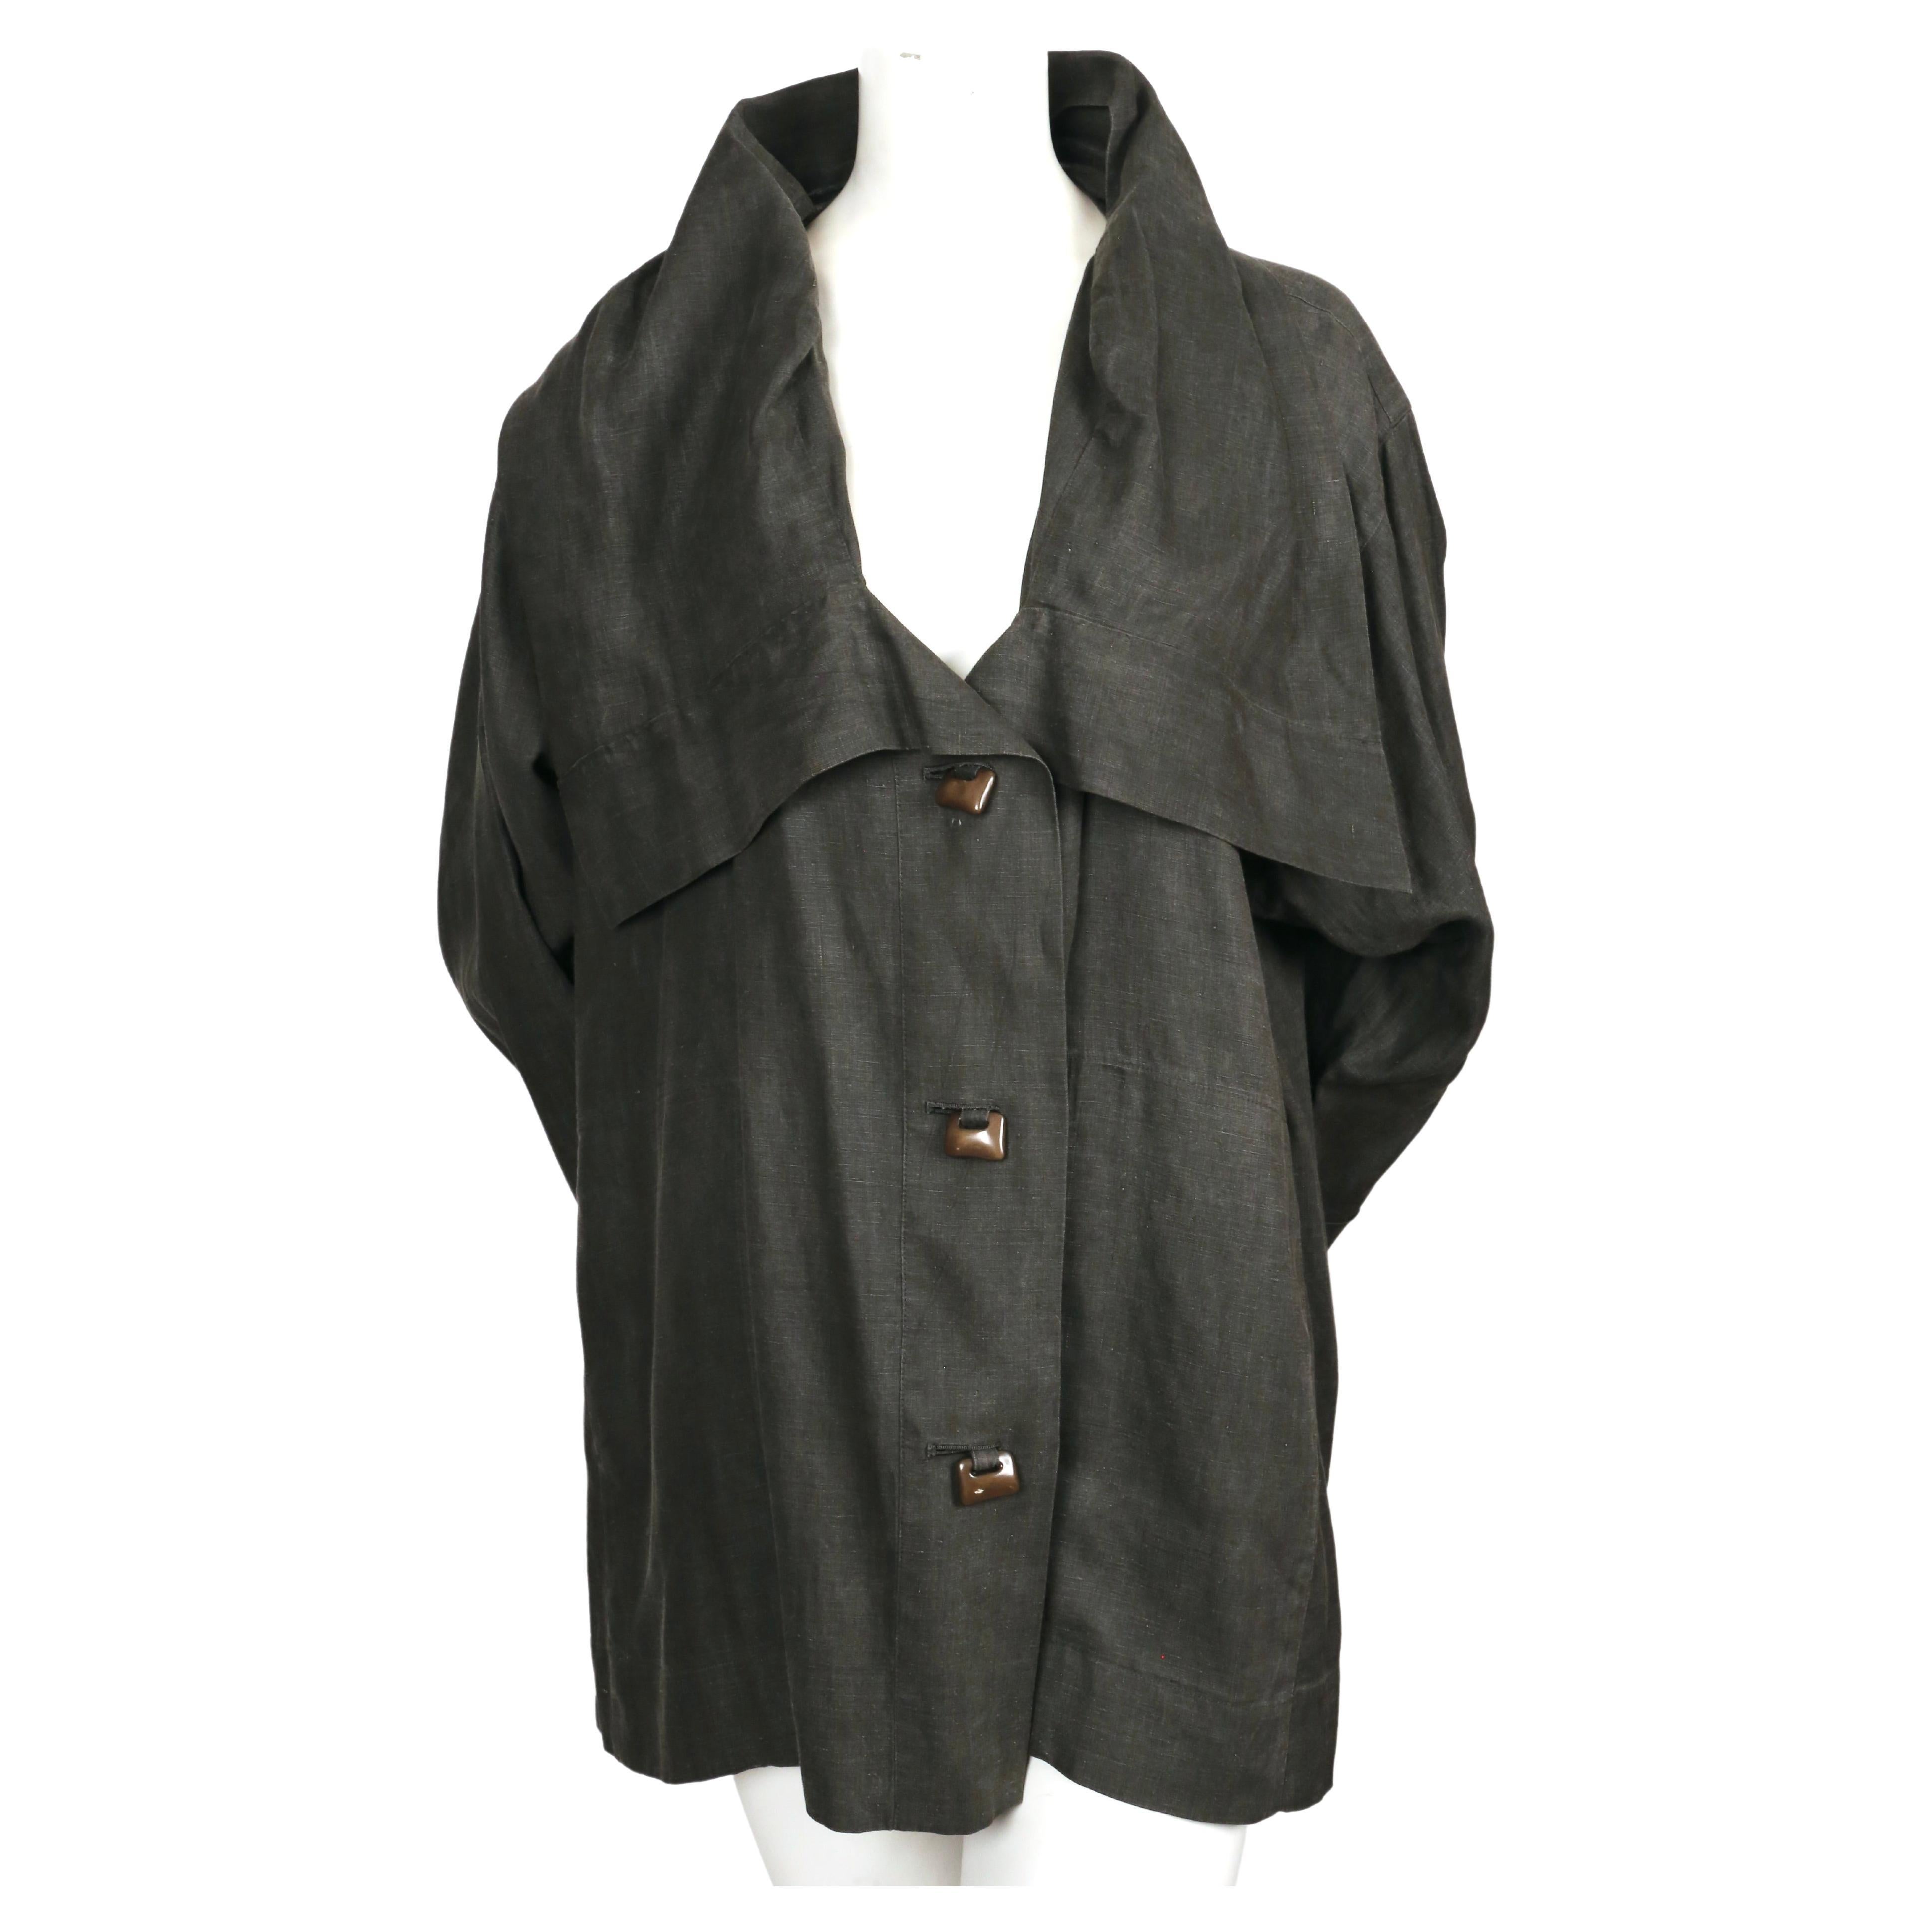 Draped, grey linen jacket with unique khaki button closure designed by Issey Miyake dating to the early 1980's. Sizing is flexible with the due to the oversized fit. Labeled a Japanese size 'M'.  Jacket has hidden slash pockets at hips and a stand